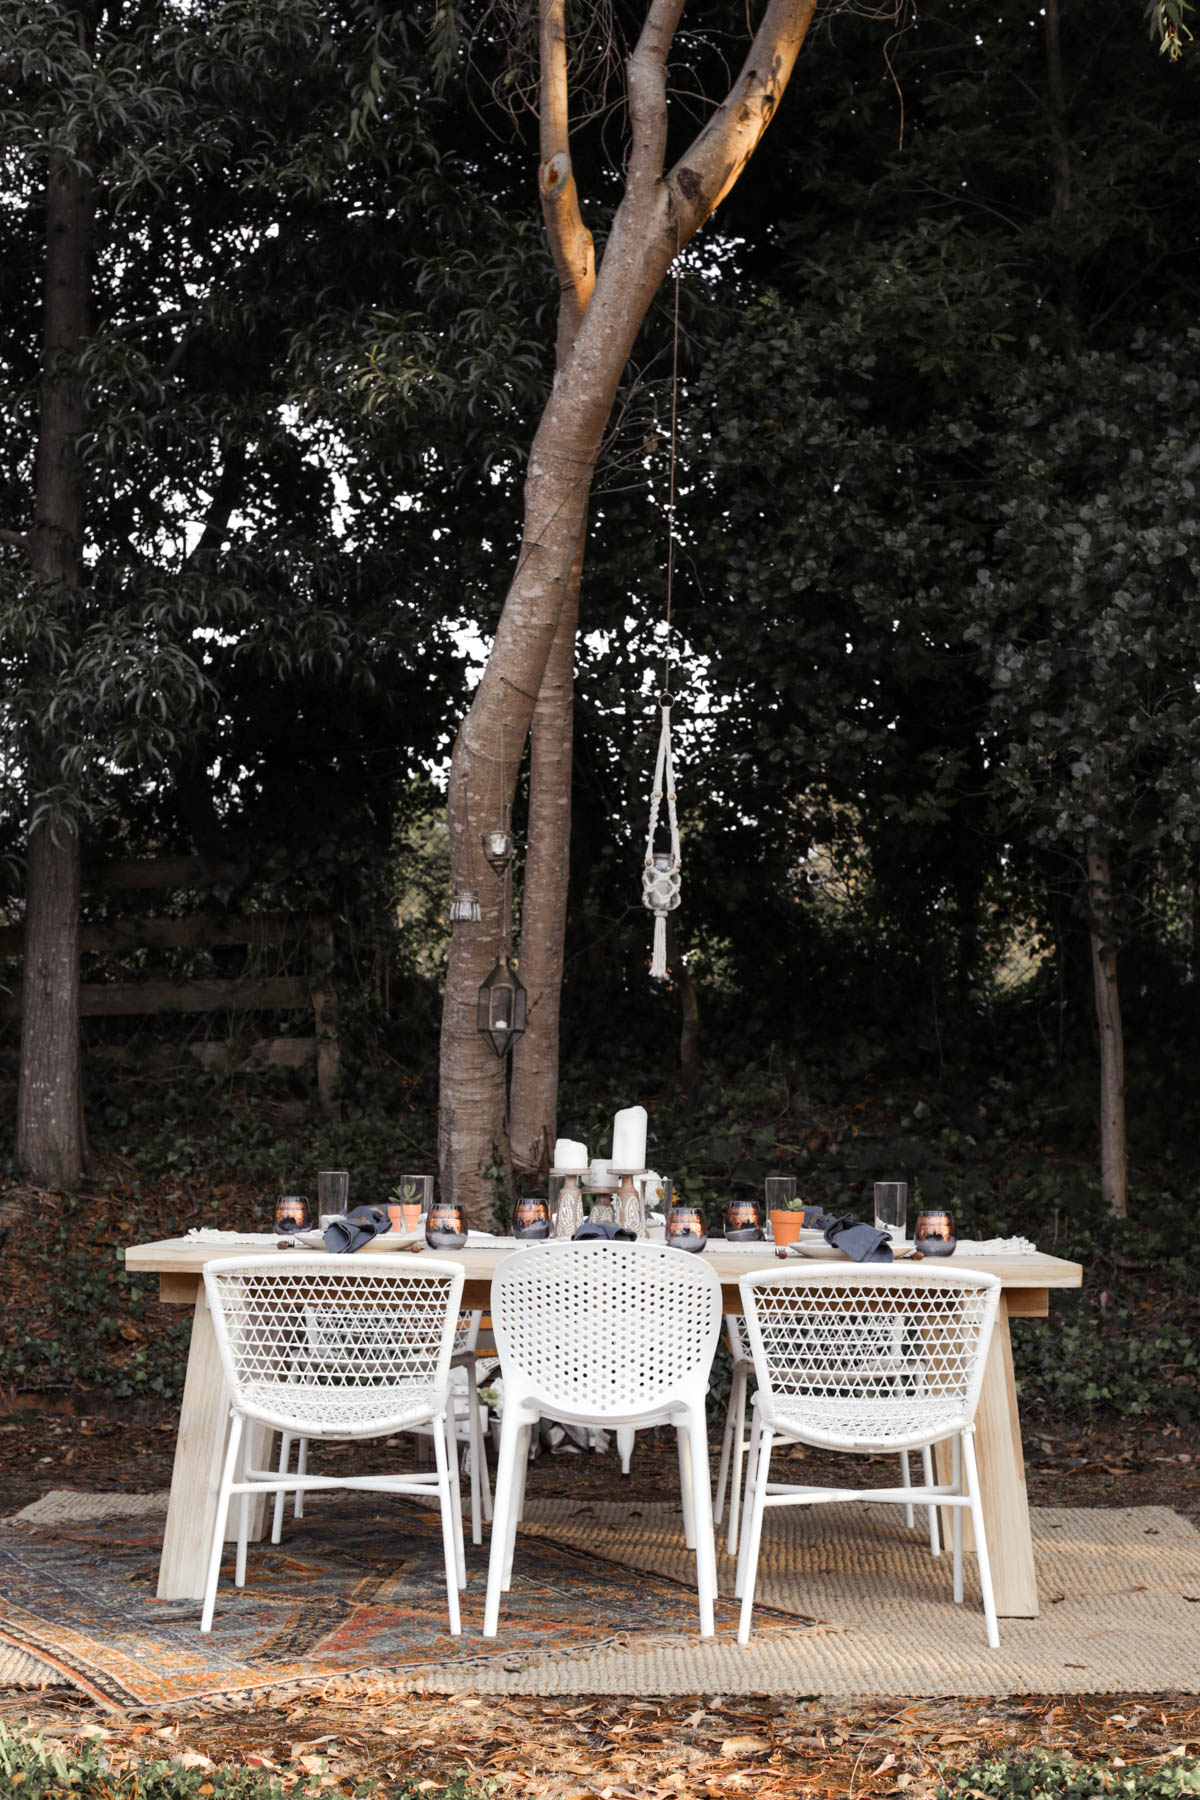 bohemian outdoor dining area with Article chairs